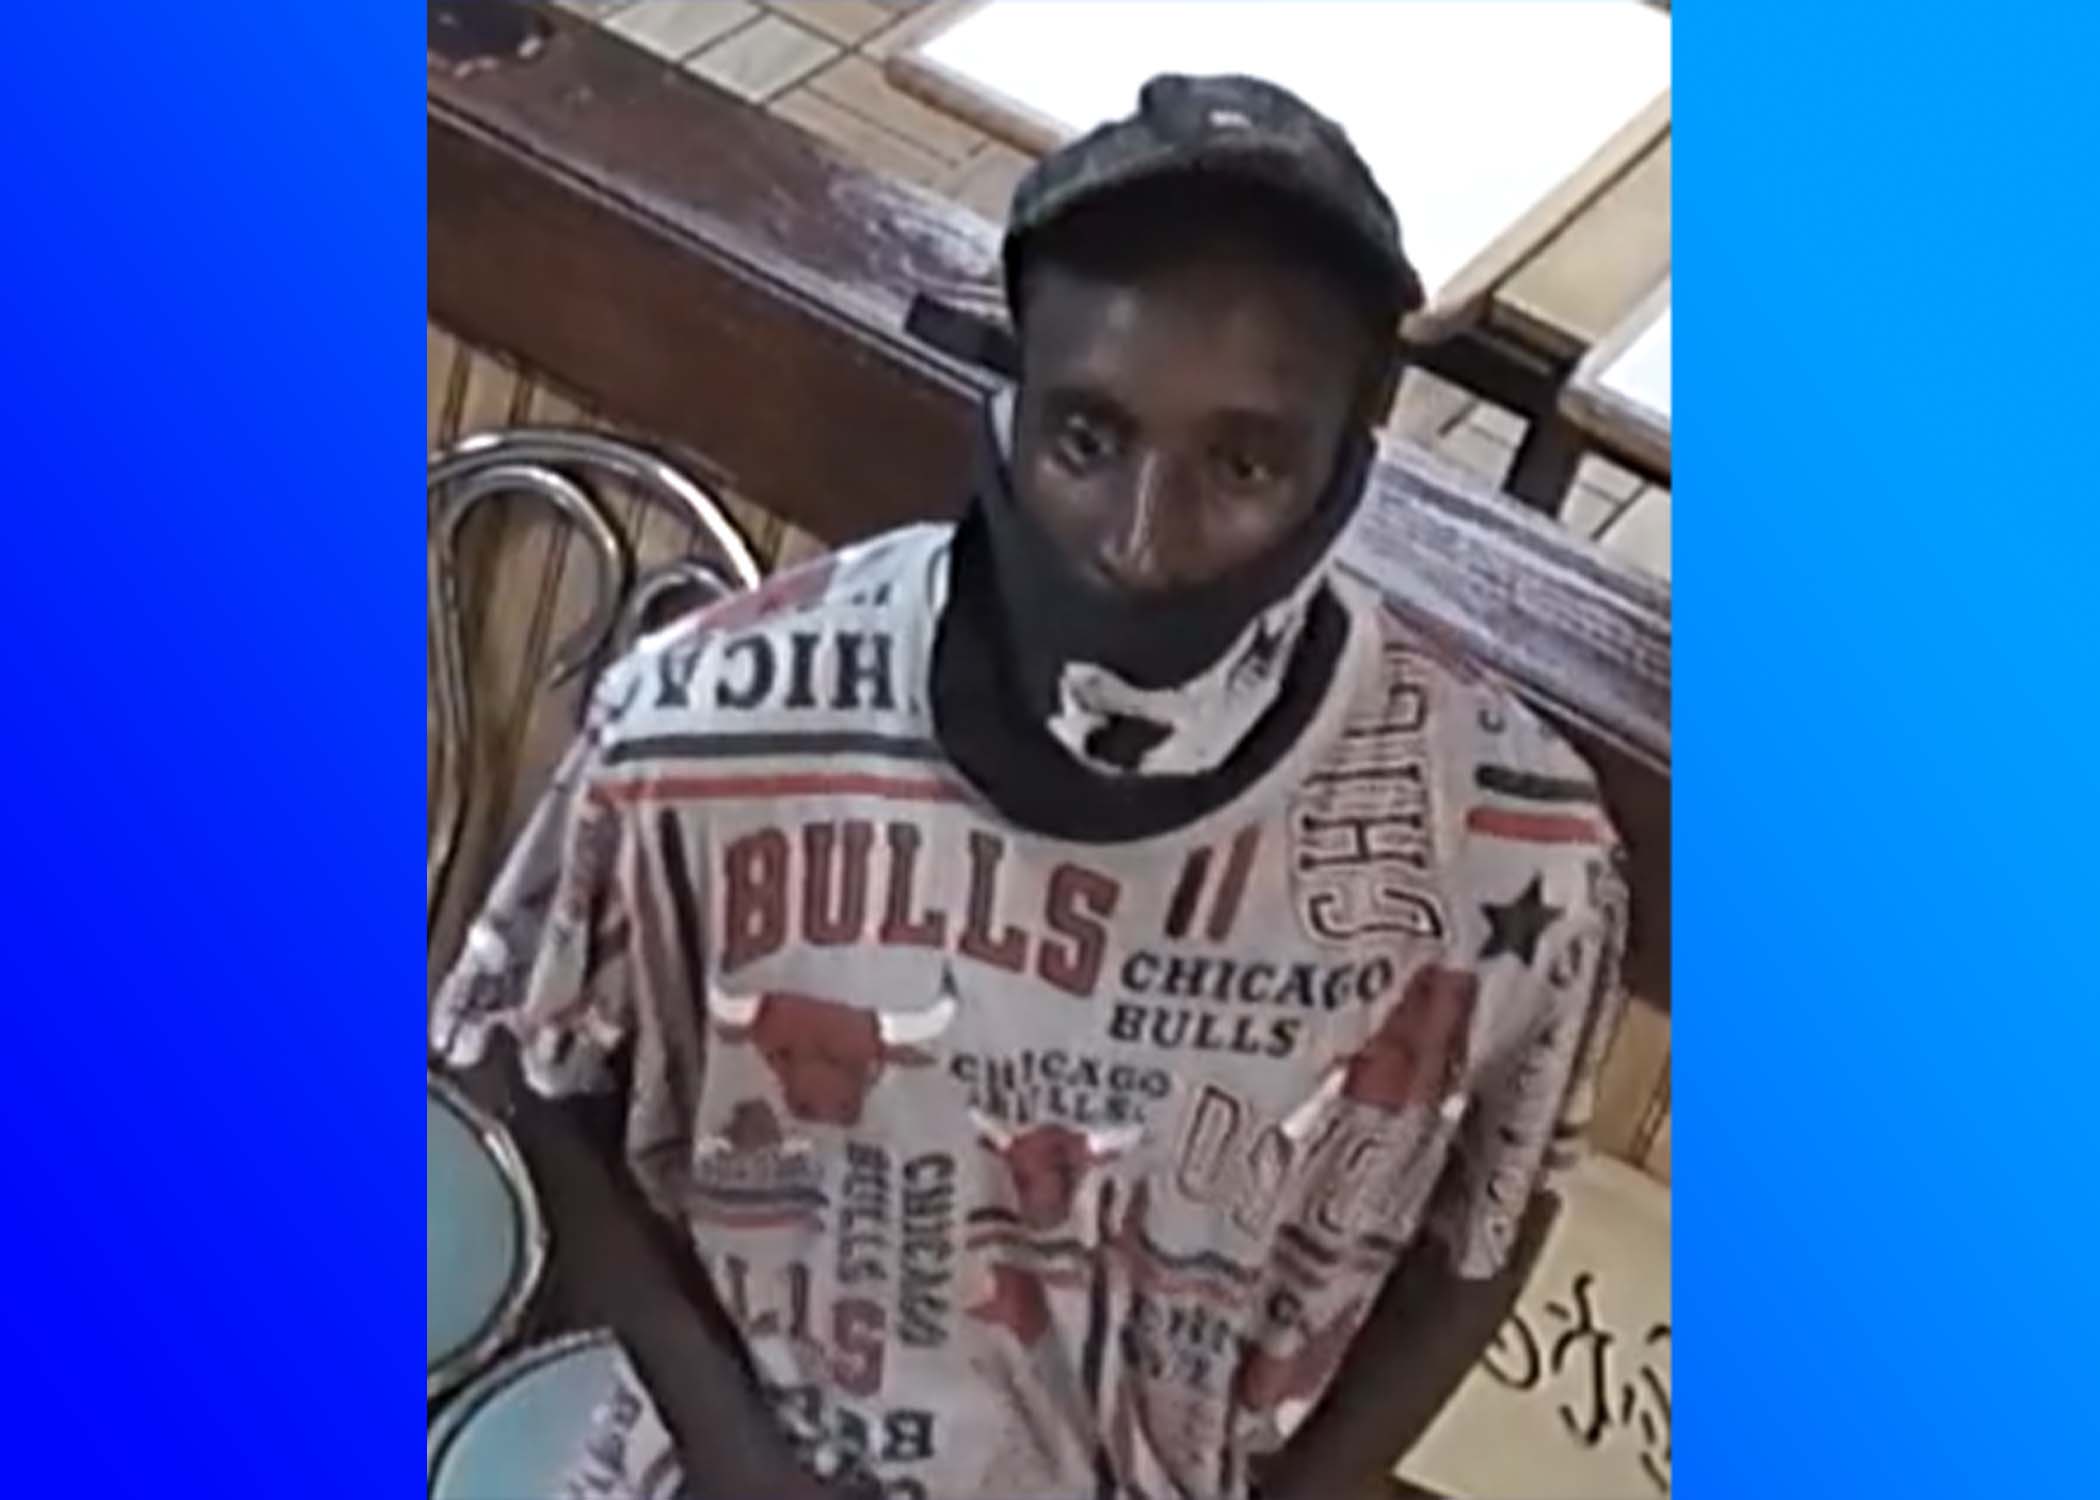 Birmingham Police request the public assistance in identifying robbery suspect